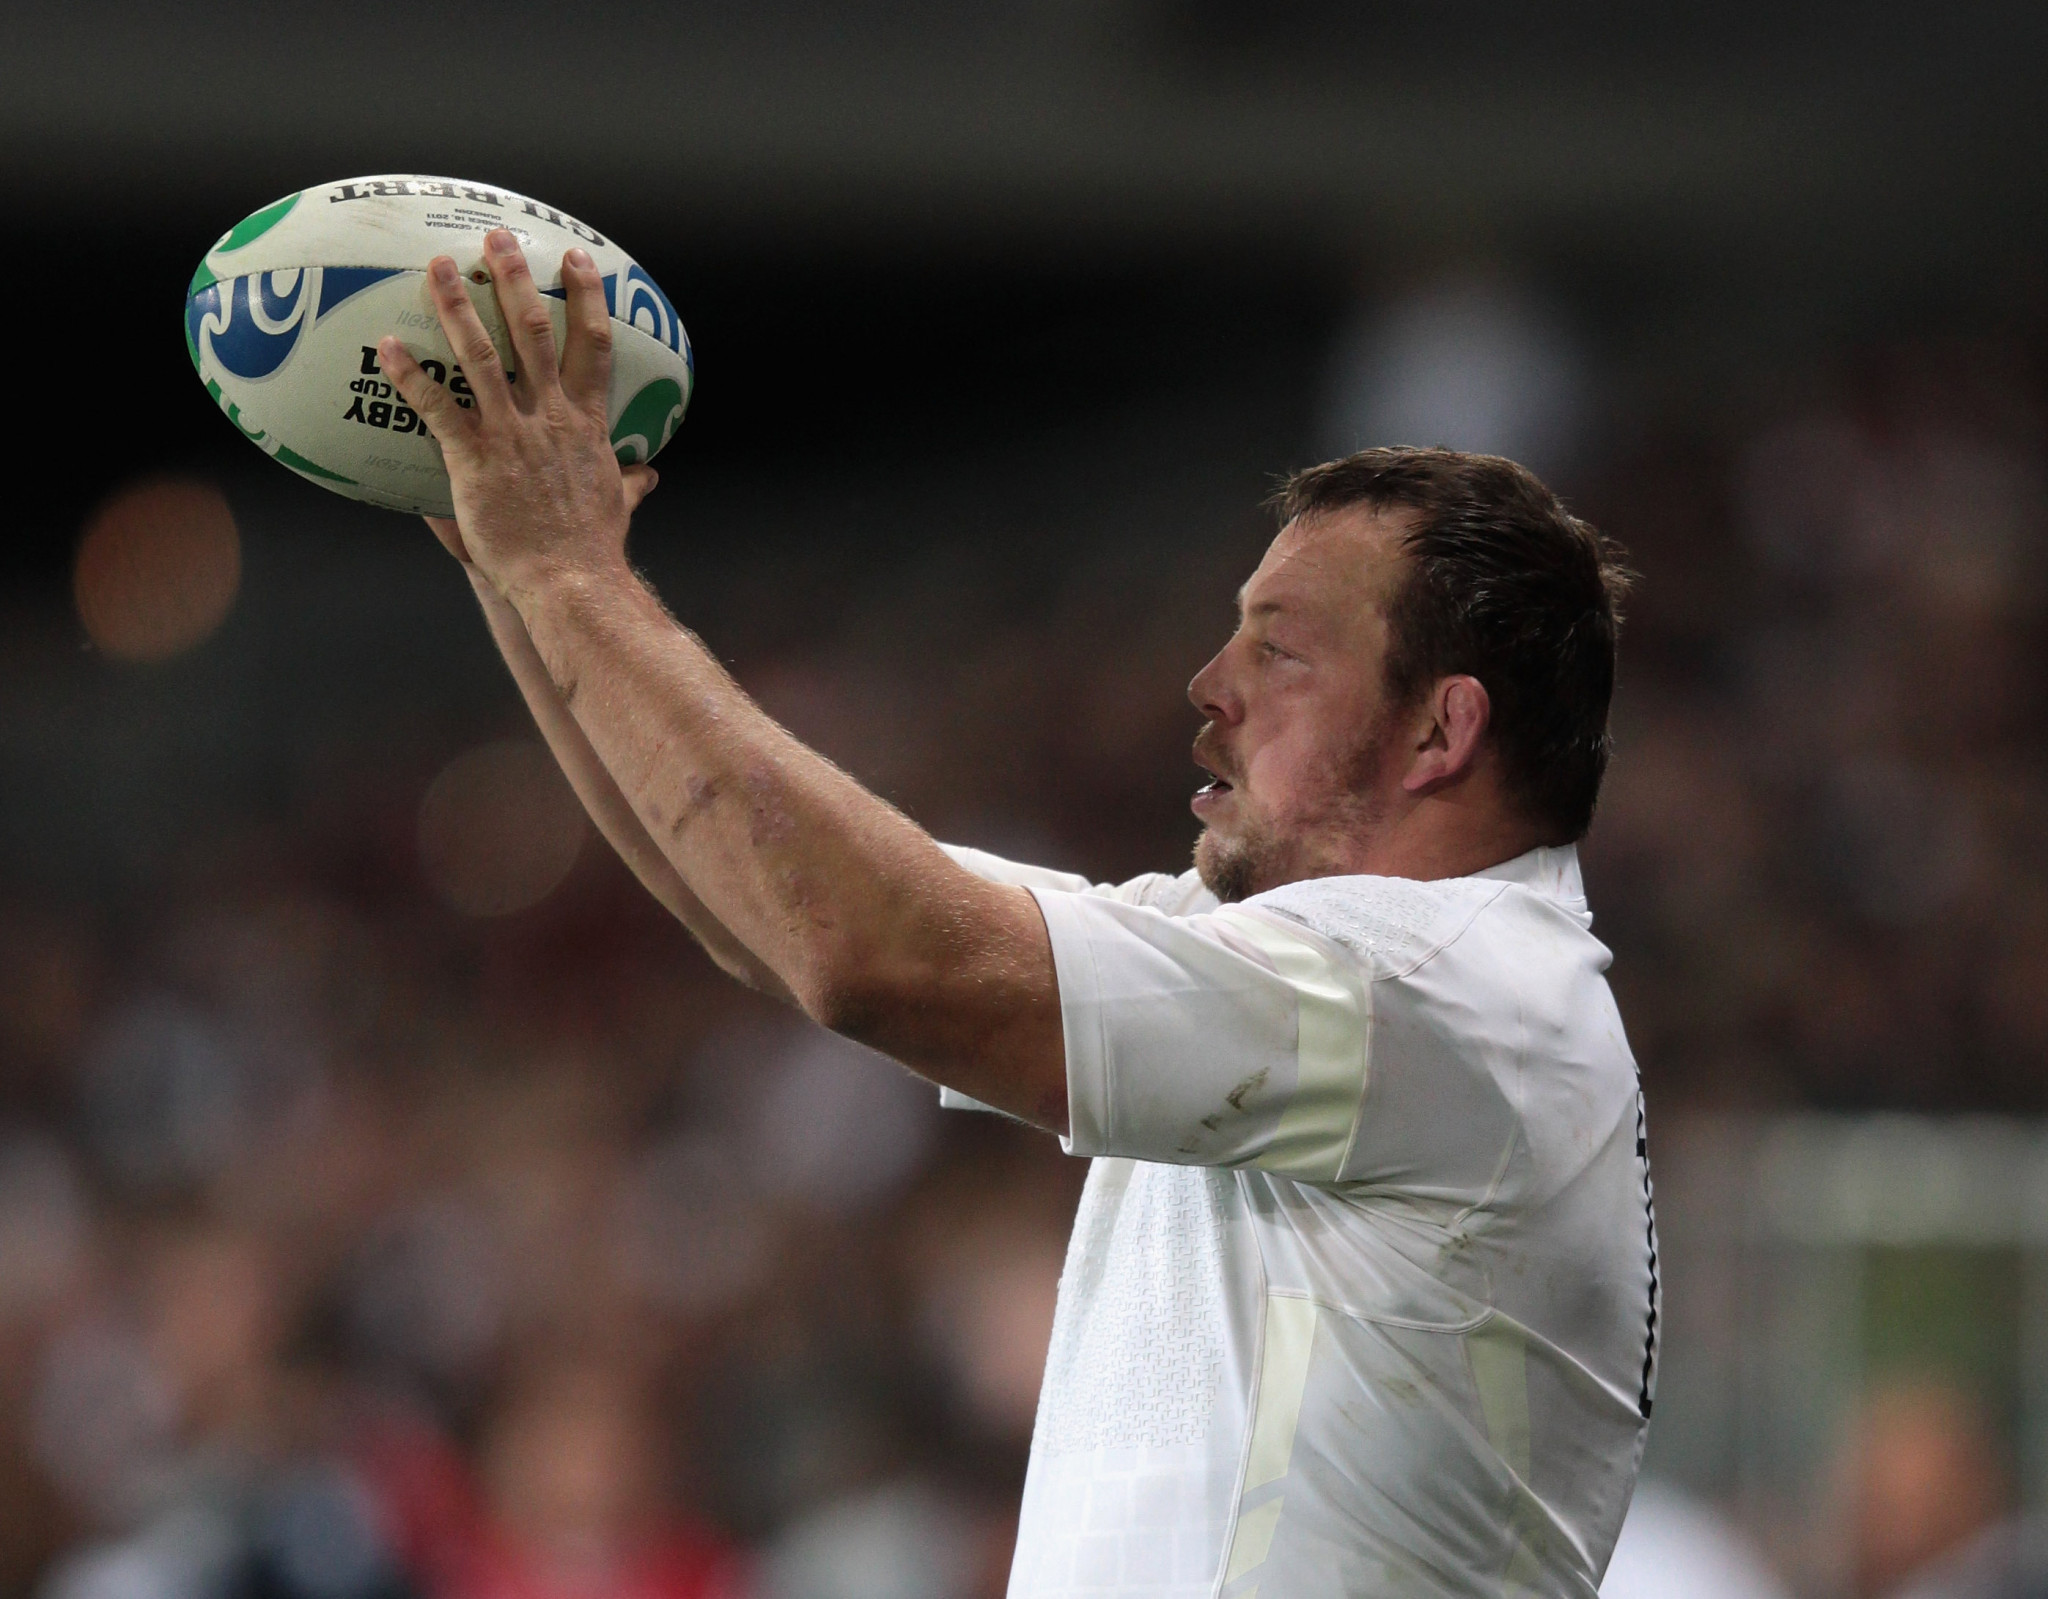 England hooker Steve Thompson admitted he could not remember playing in any of England's winning 2003 Rugby World Cup run because of early onset dementia ©Getty Images